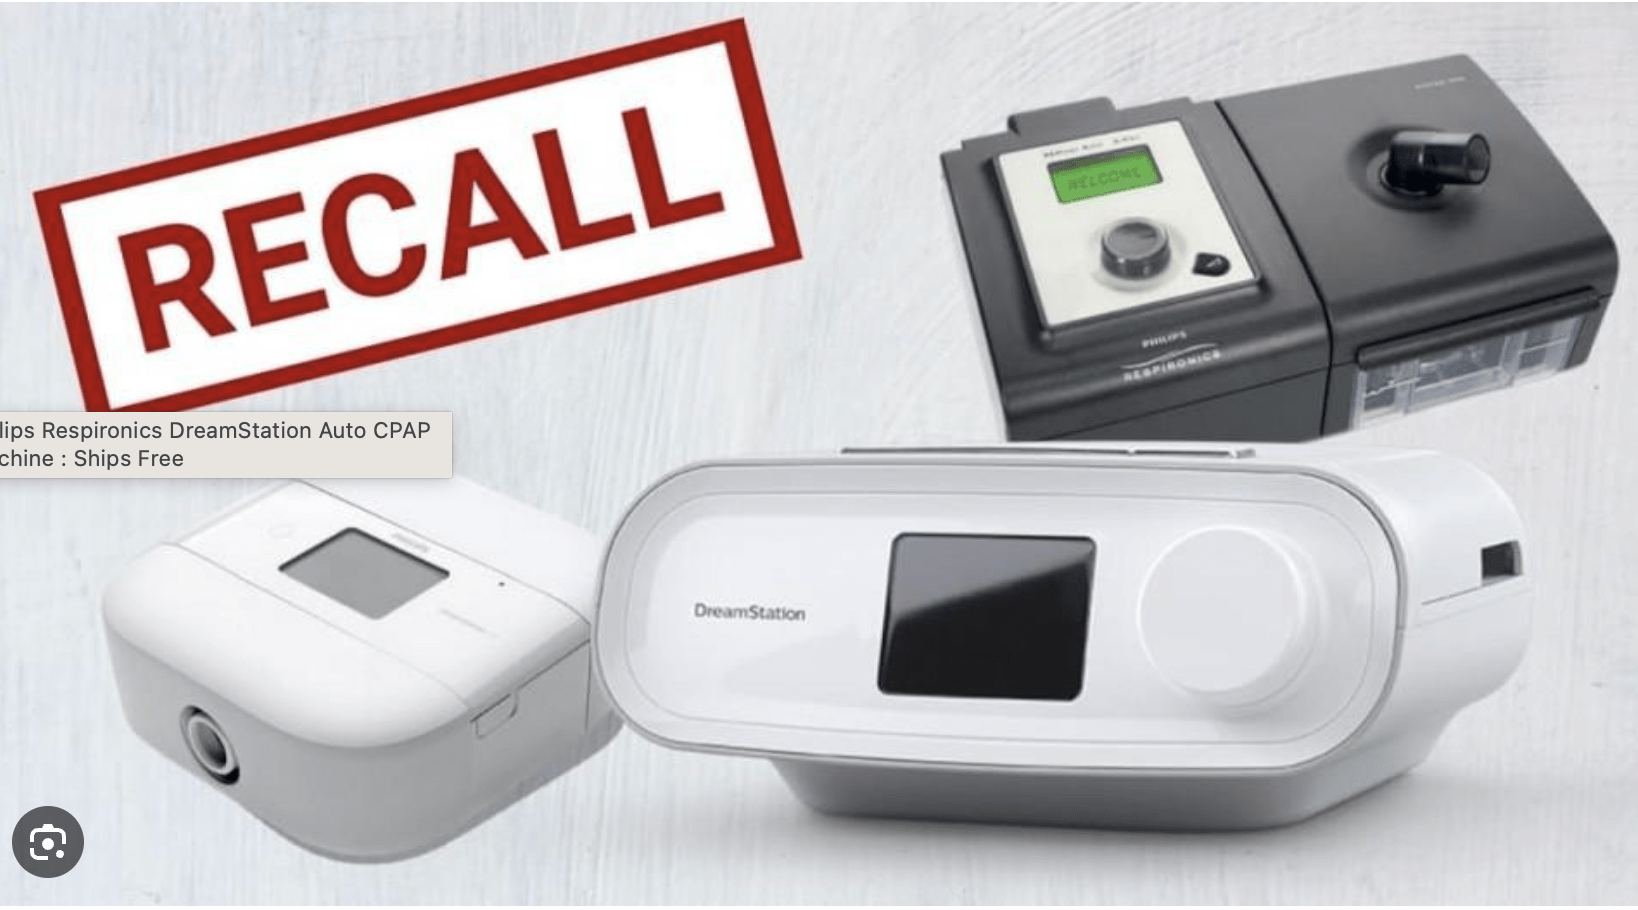 Philips Respironics CPAP devices